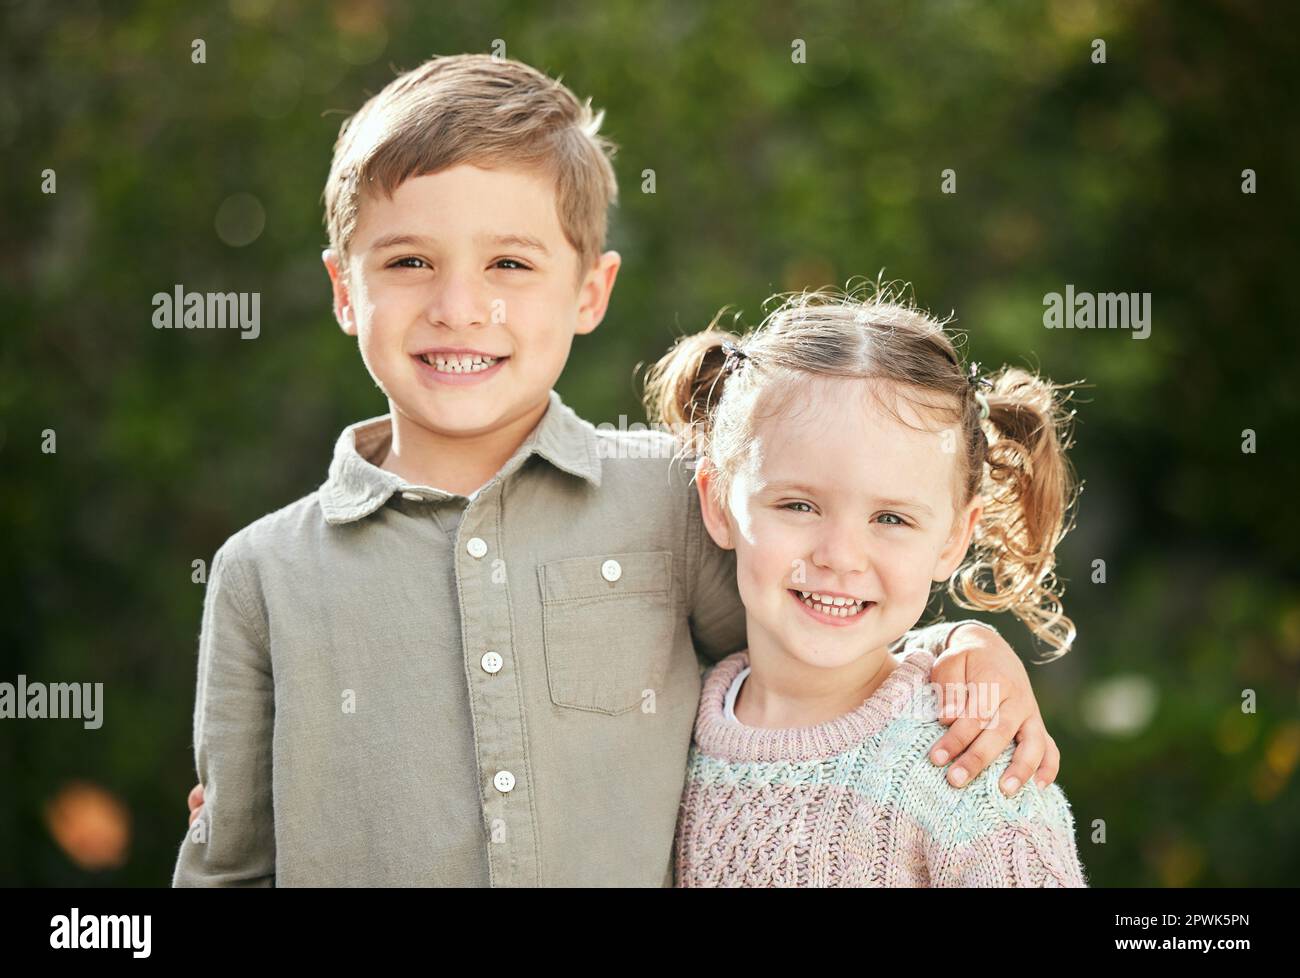 Hes my big brother. an adorable little boy and girl standing outside Stock Photo